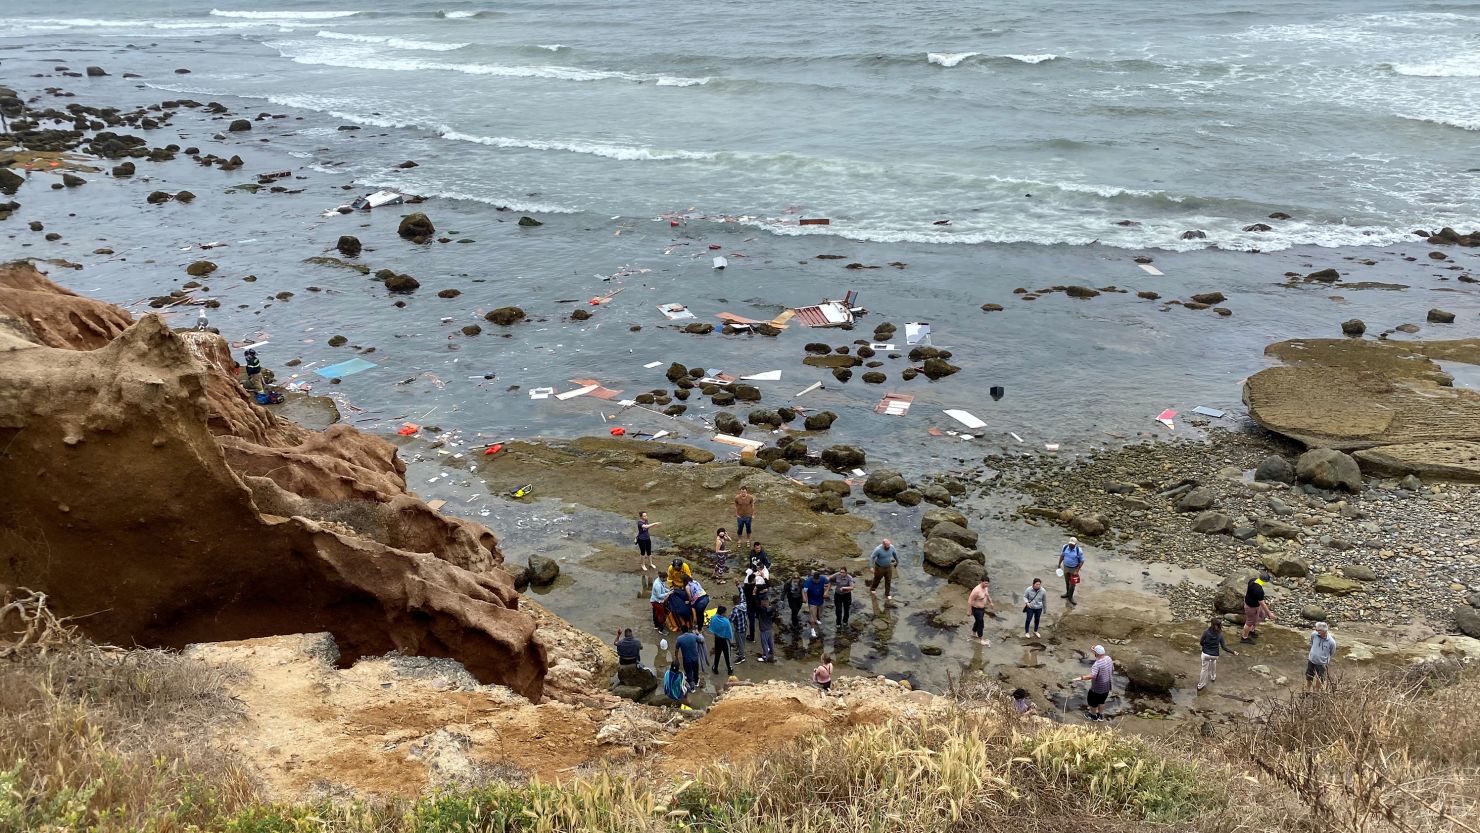 People gather after a boat carrying migrants from Mexico shipwrecked off San Diego in May 2021.